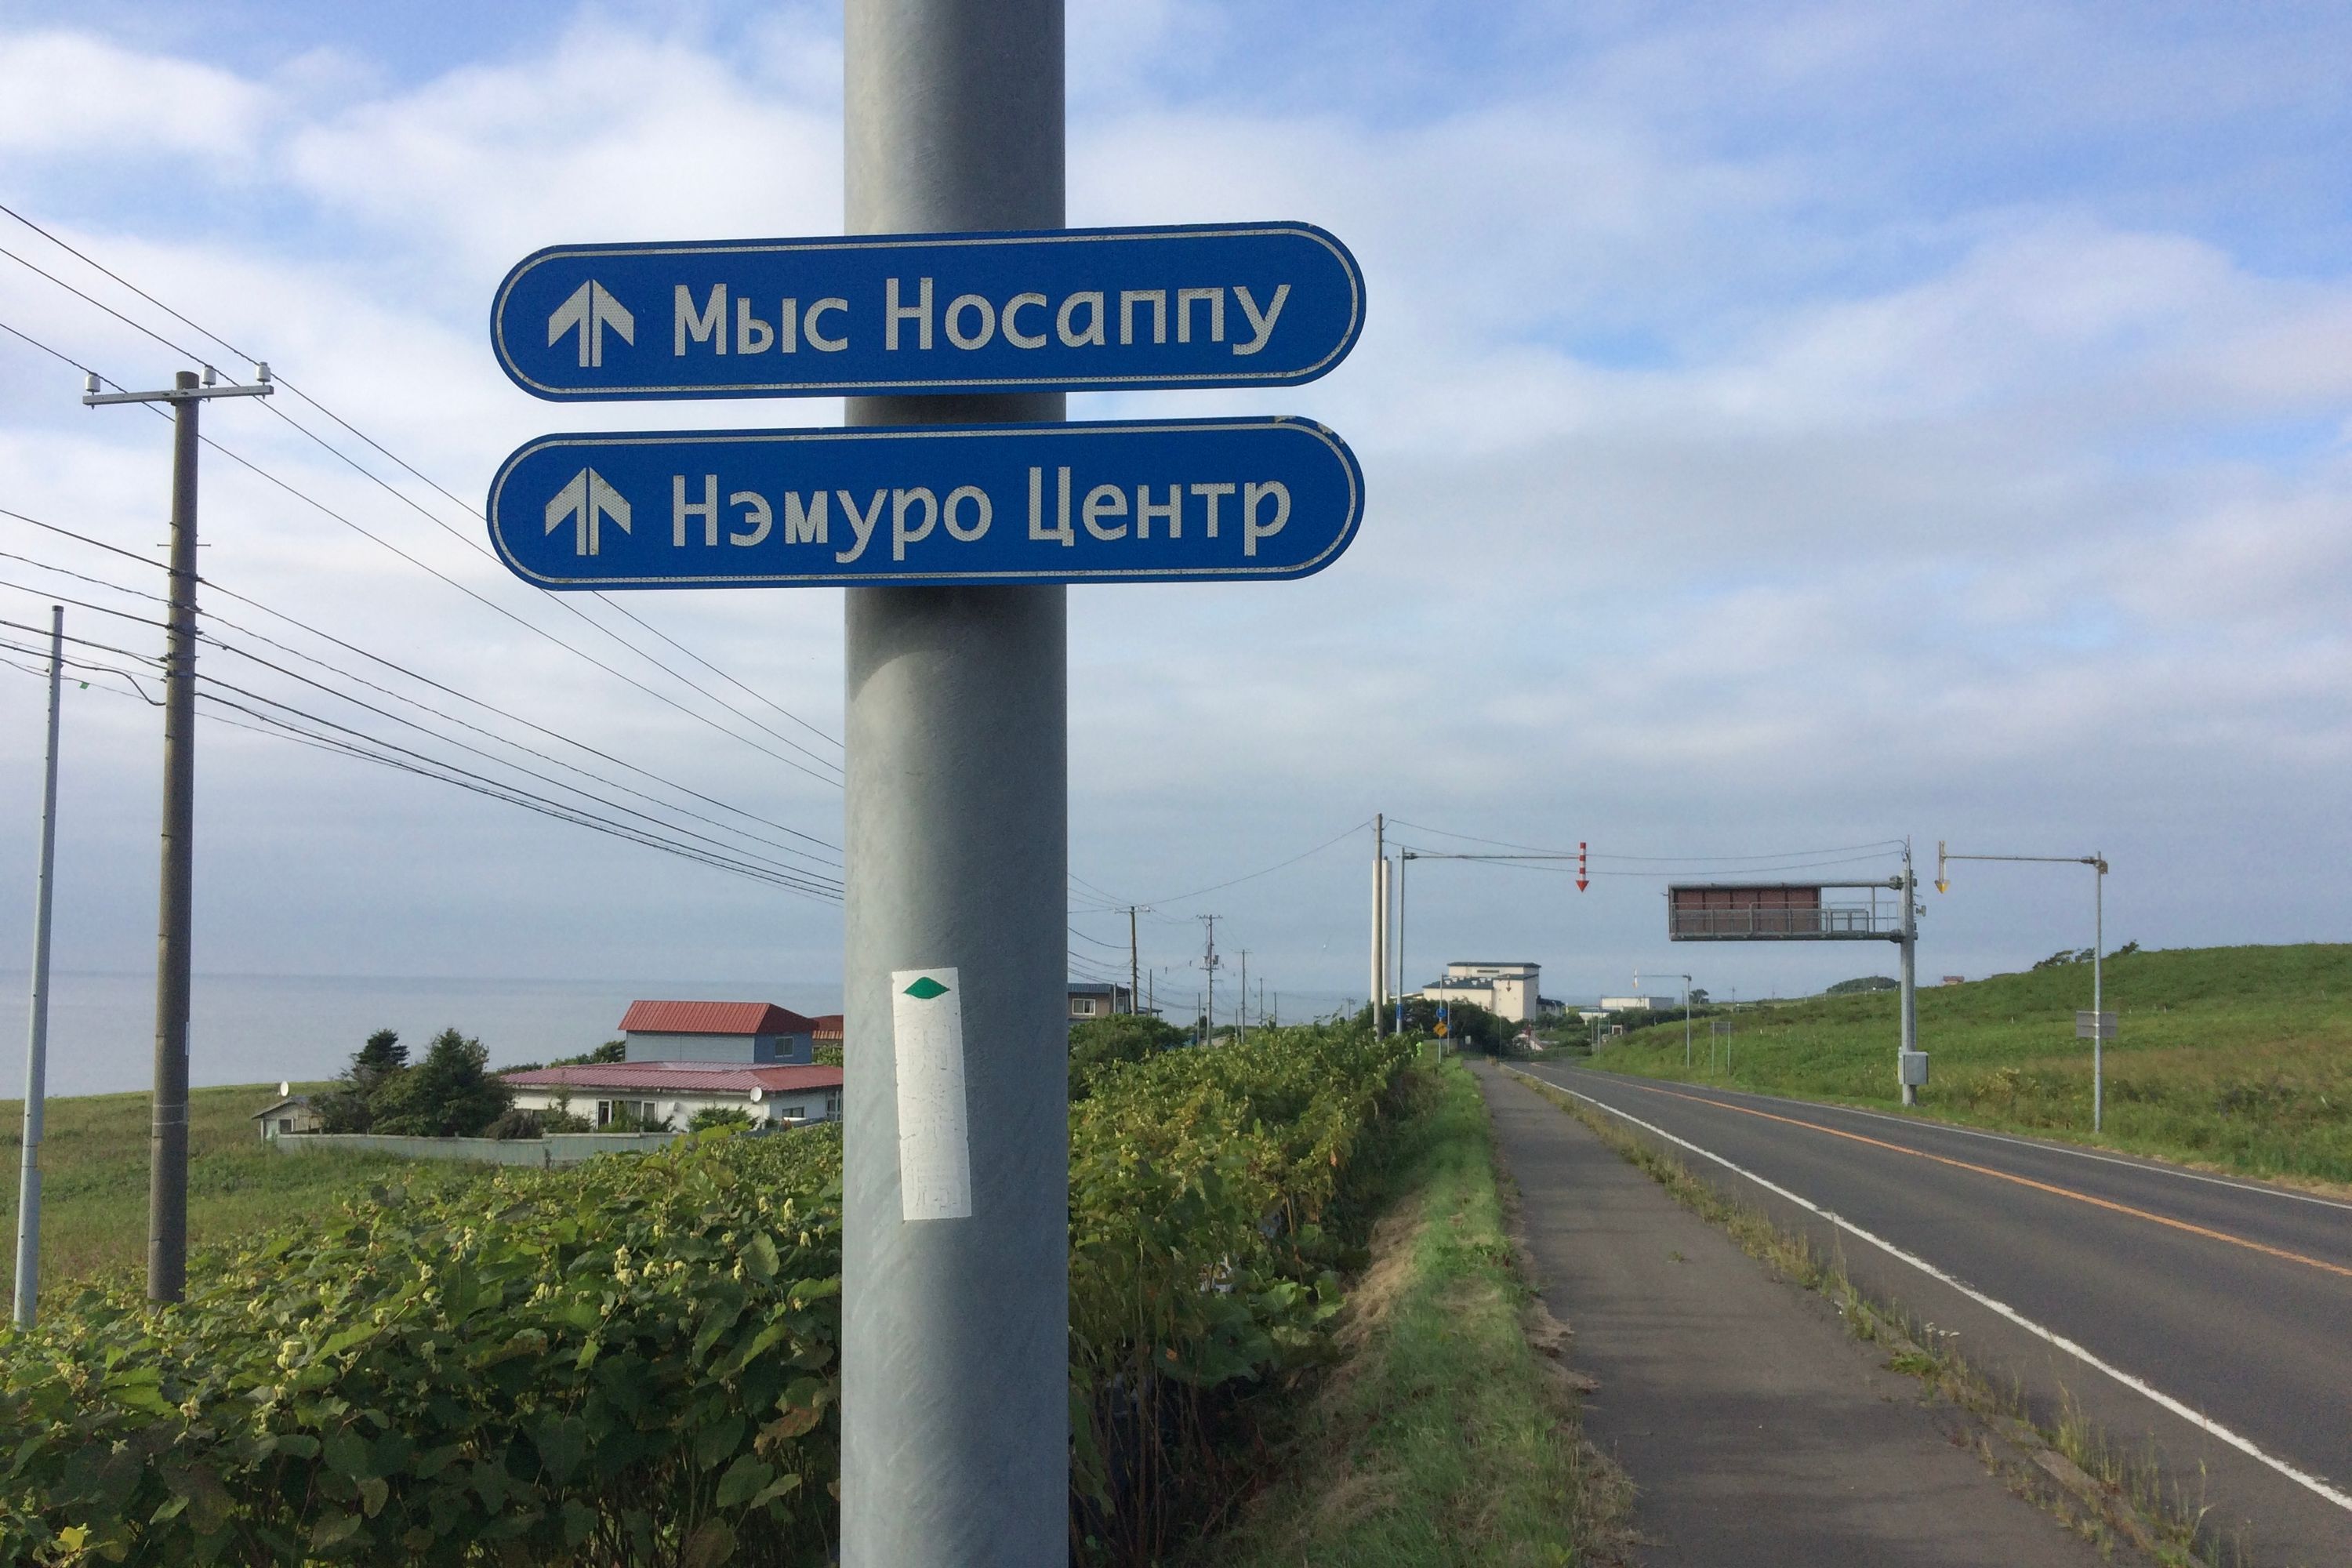 Signs on a pole in Russian, to Nemuro Center and Cape Nosappu, the easternmost point of the Japanese mainland.